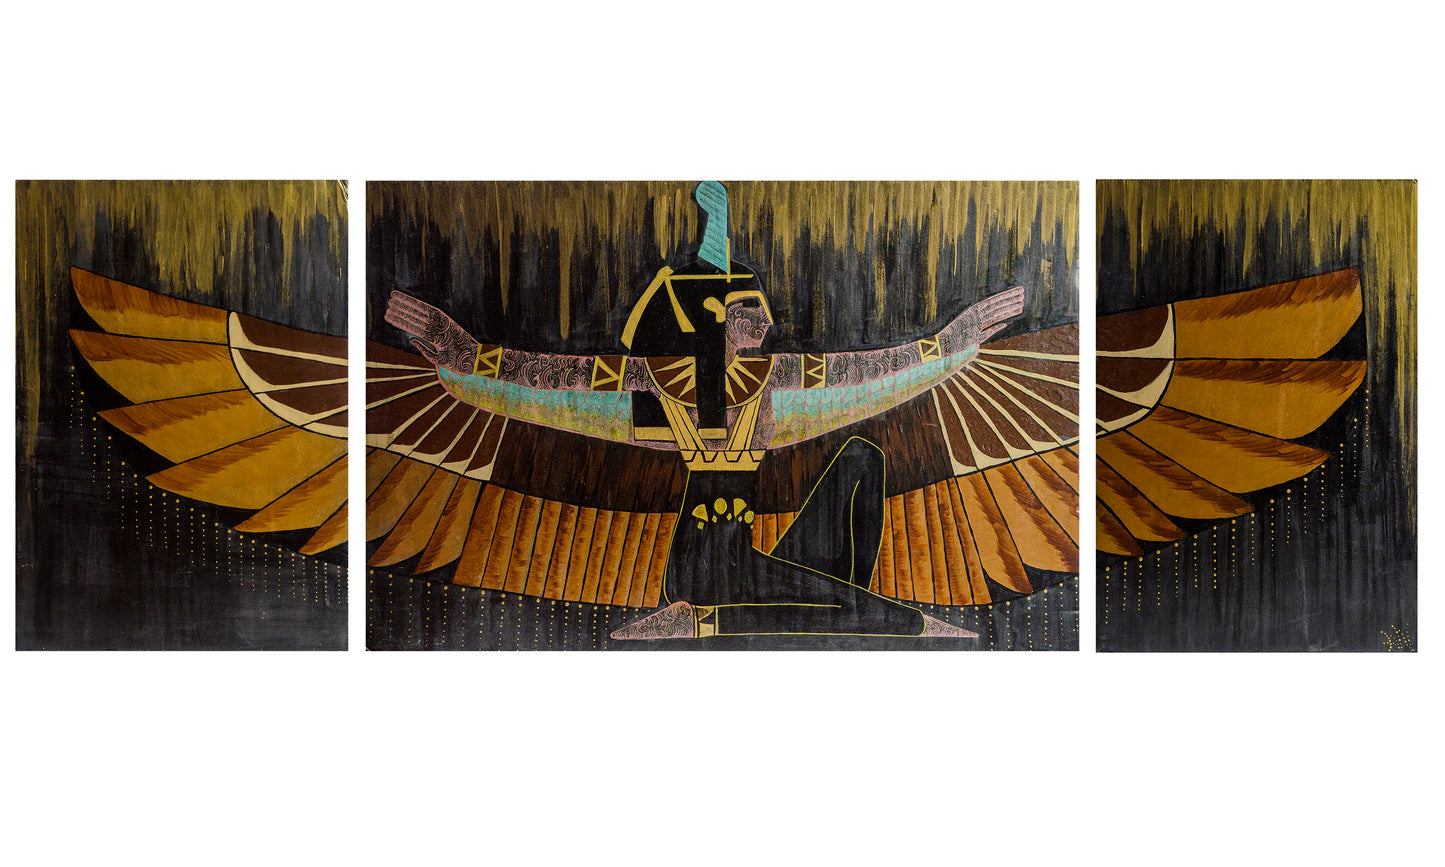 Egyptian Art, Egyptian inspired, Ma’at, triptych, contemporary art, art gallery, wall art, wall decor